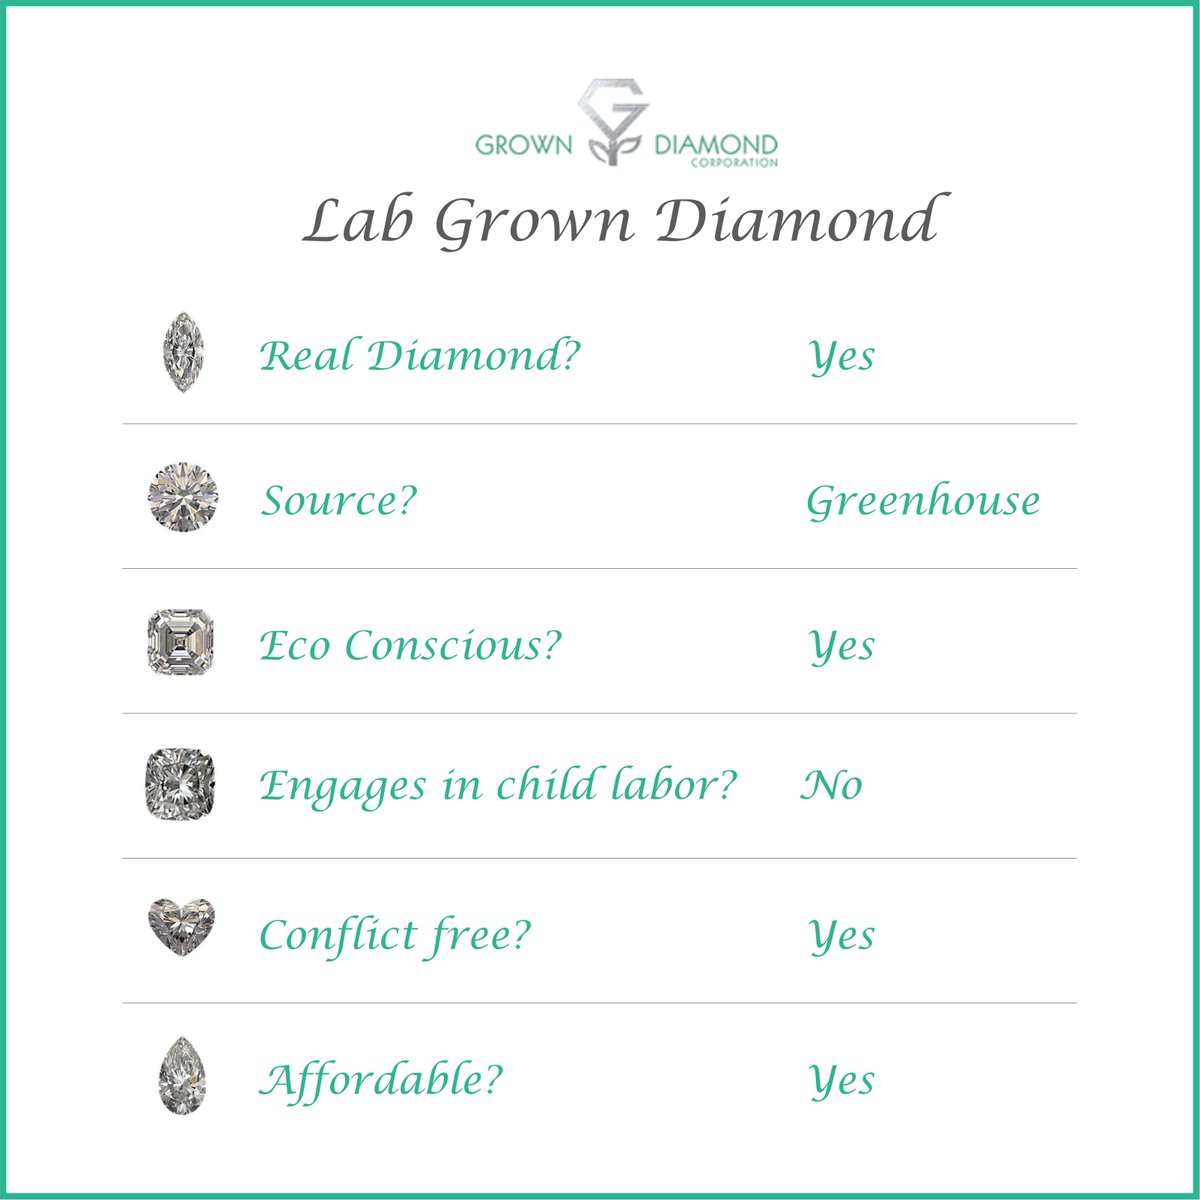 #FactsandMyths clarified! 
All our actions are earth conscious and ensure complete transparency of our lab grown diamonds. These diamonds are real, affordable, and ecofriendly, made for you in a safe environment. 
To know more, contact us: pos.li/2ardxi
#LabGrownDiamond